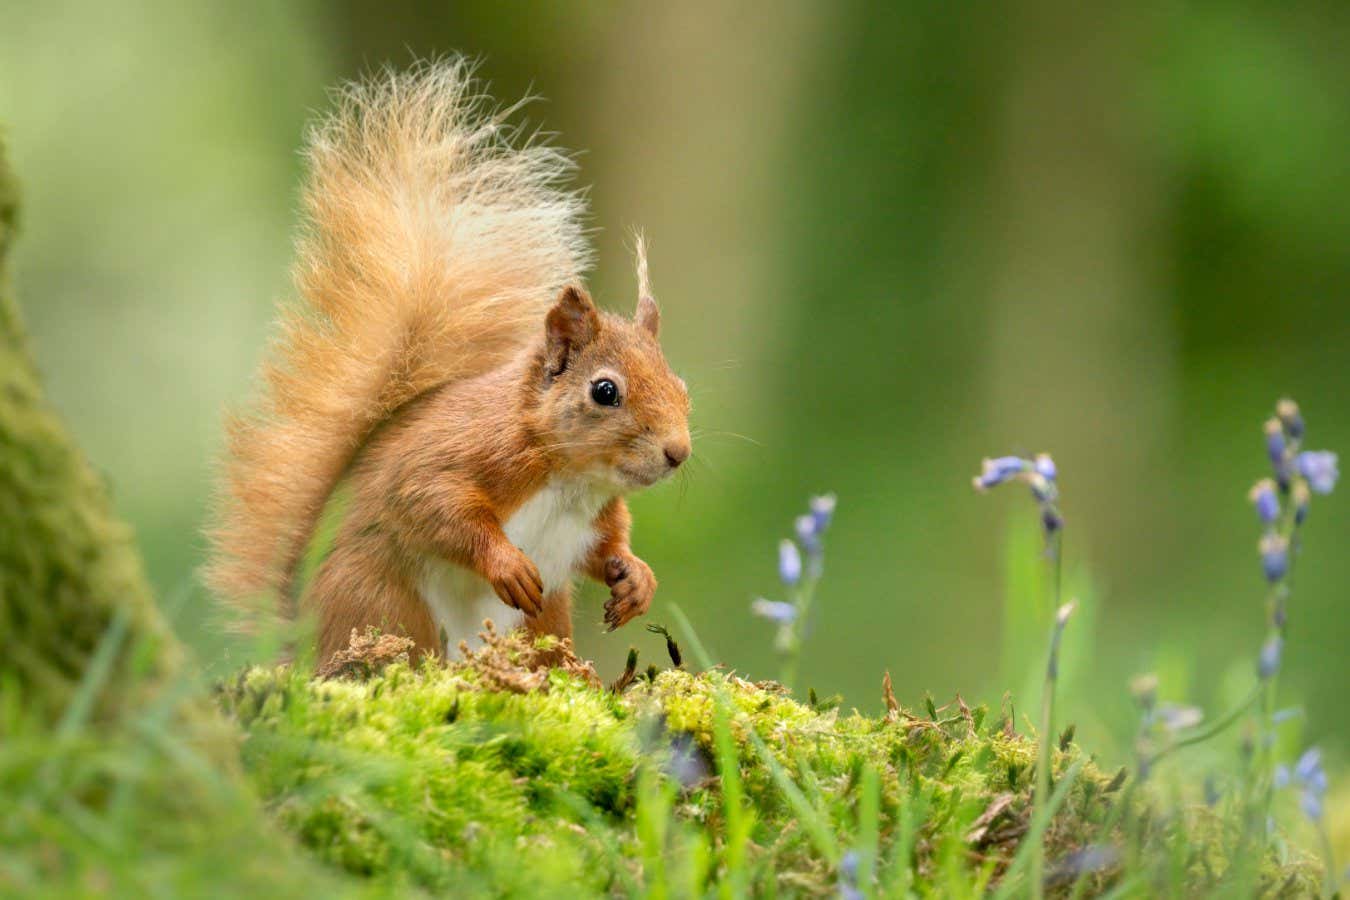 Red squirrels were hosts for leprosy in medieval England